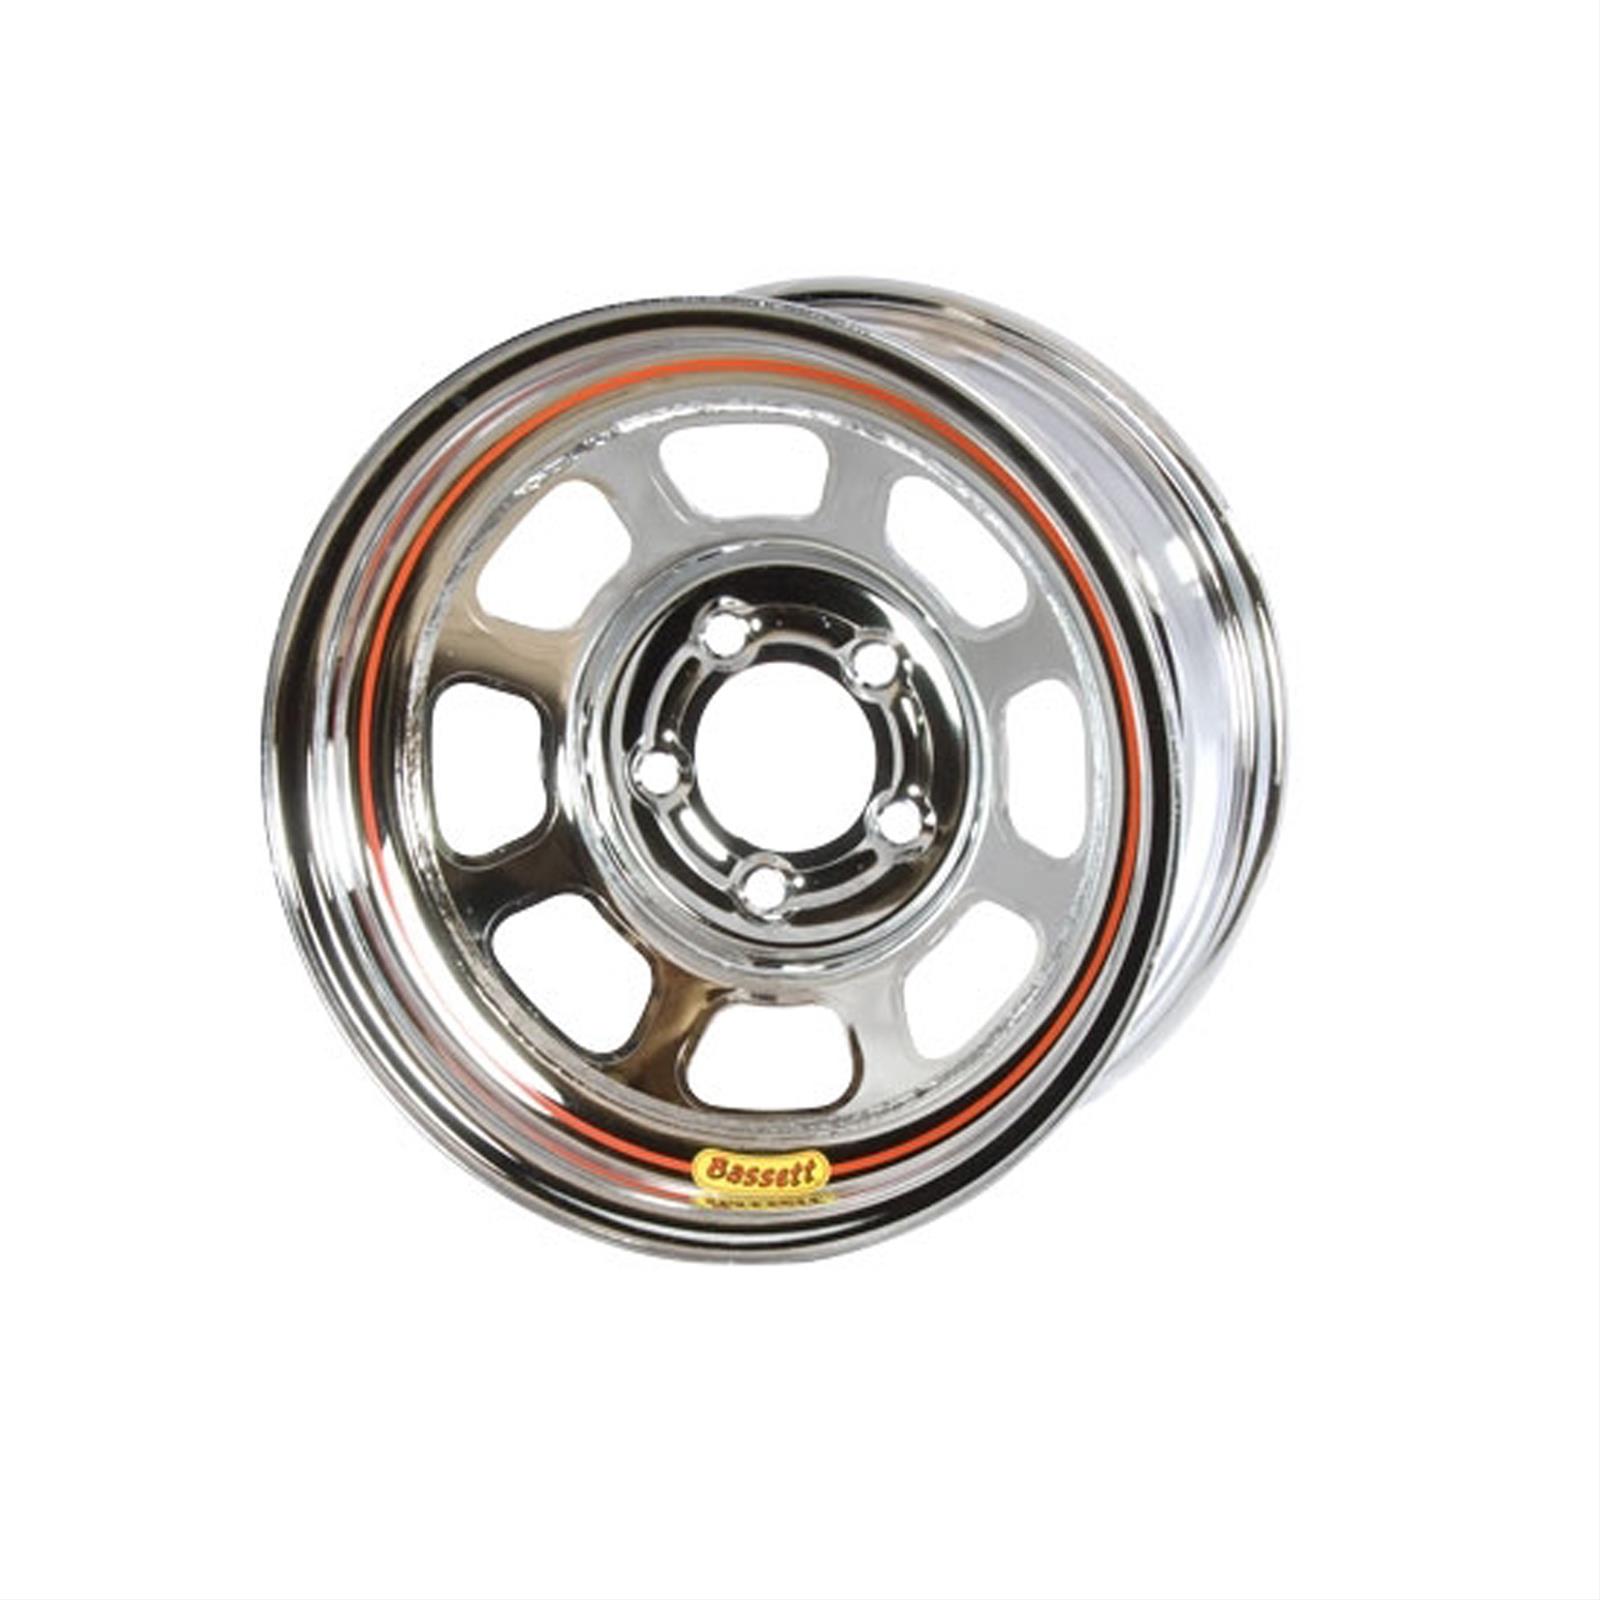 Free Shipping - Basset Racing DOT-Approved Chrome Street Legal Wheels with ...